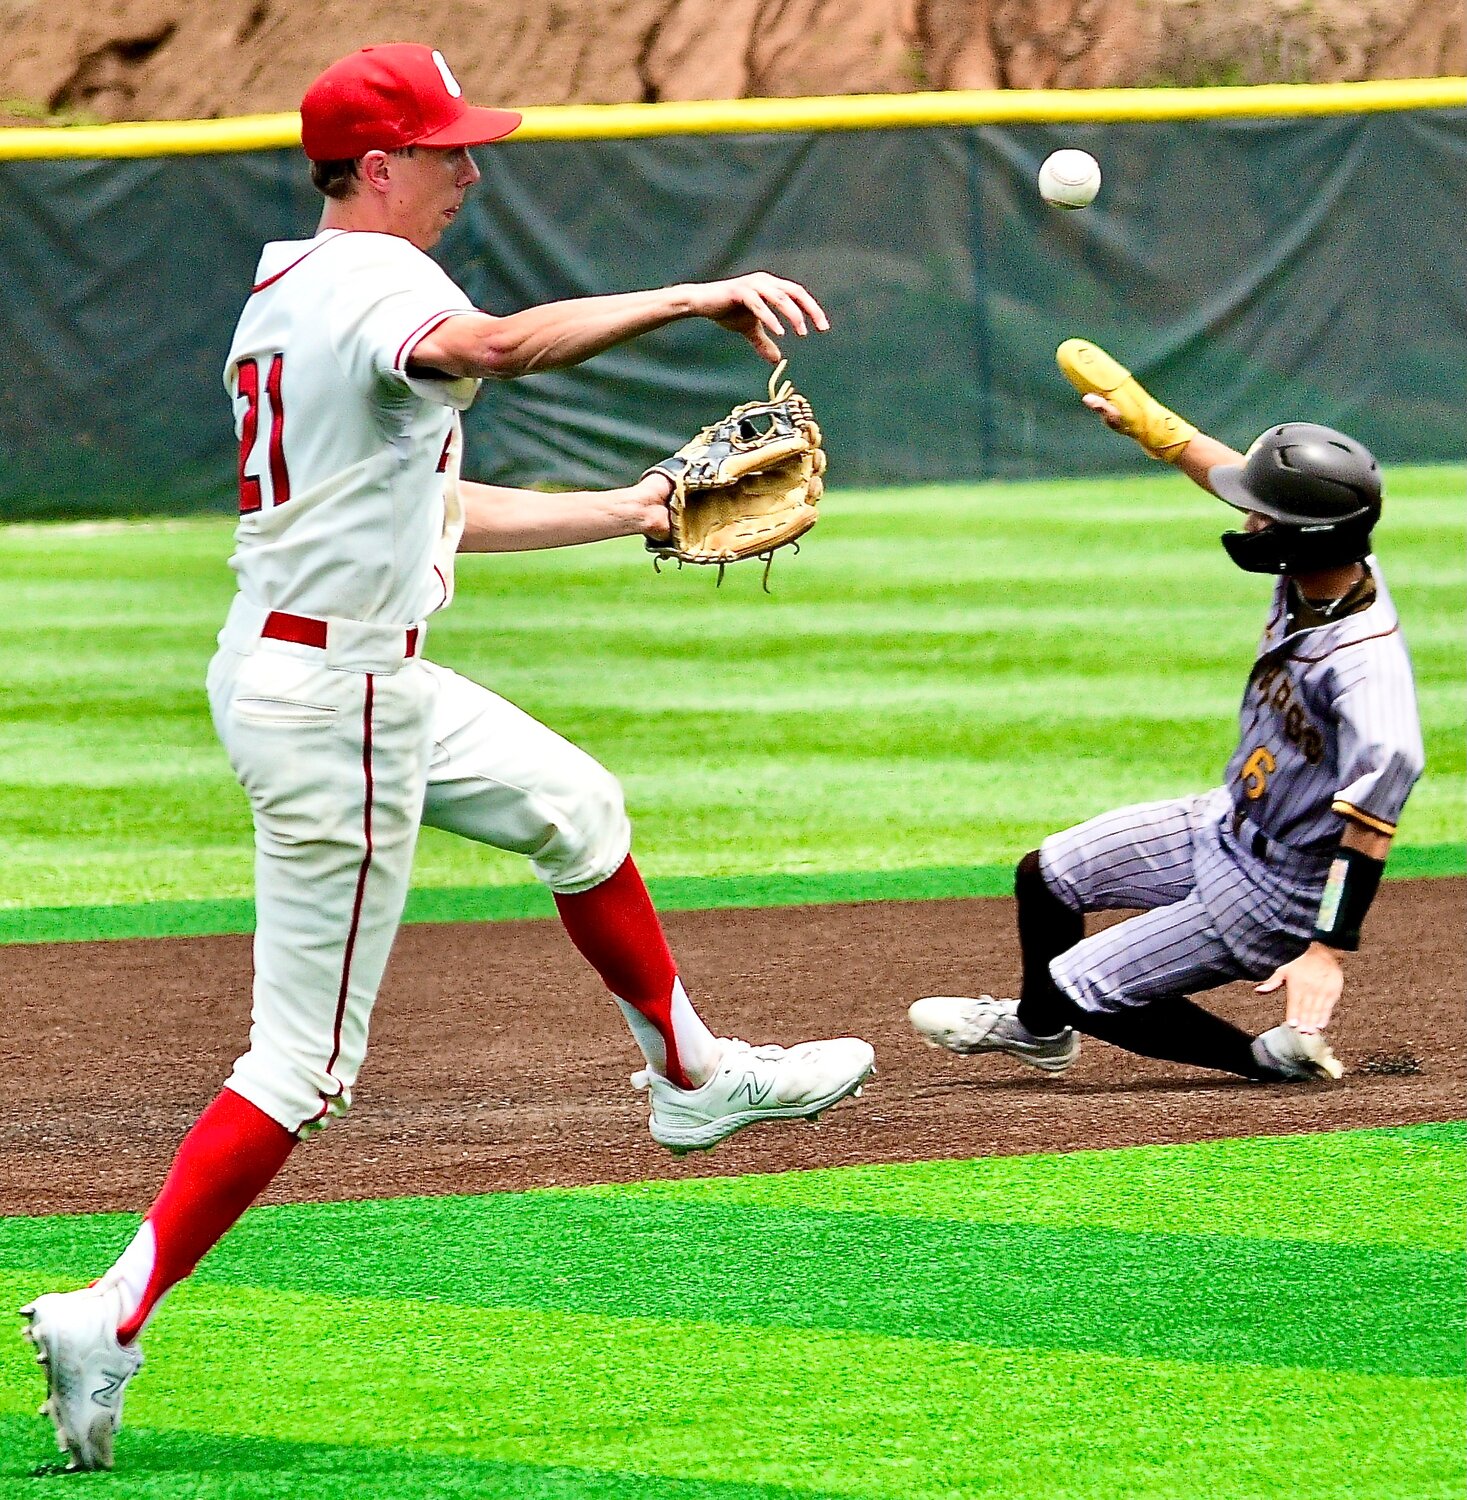 OZARK'S ALEX NIMMO makes a throw to first base as a Kickapoo runner slides at second base.